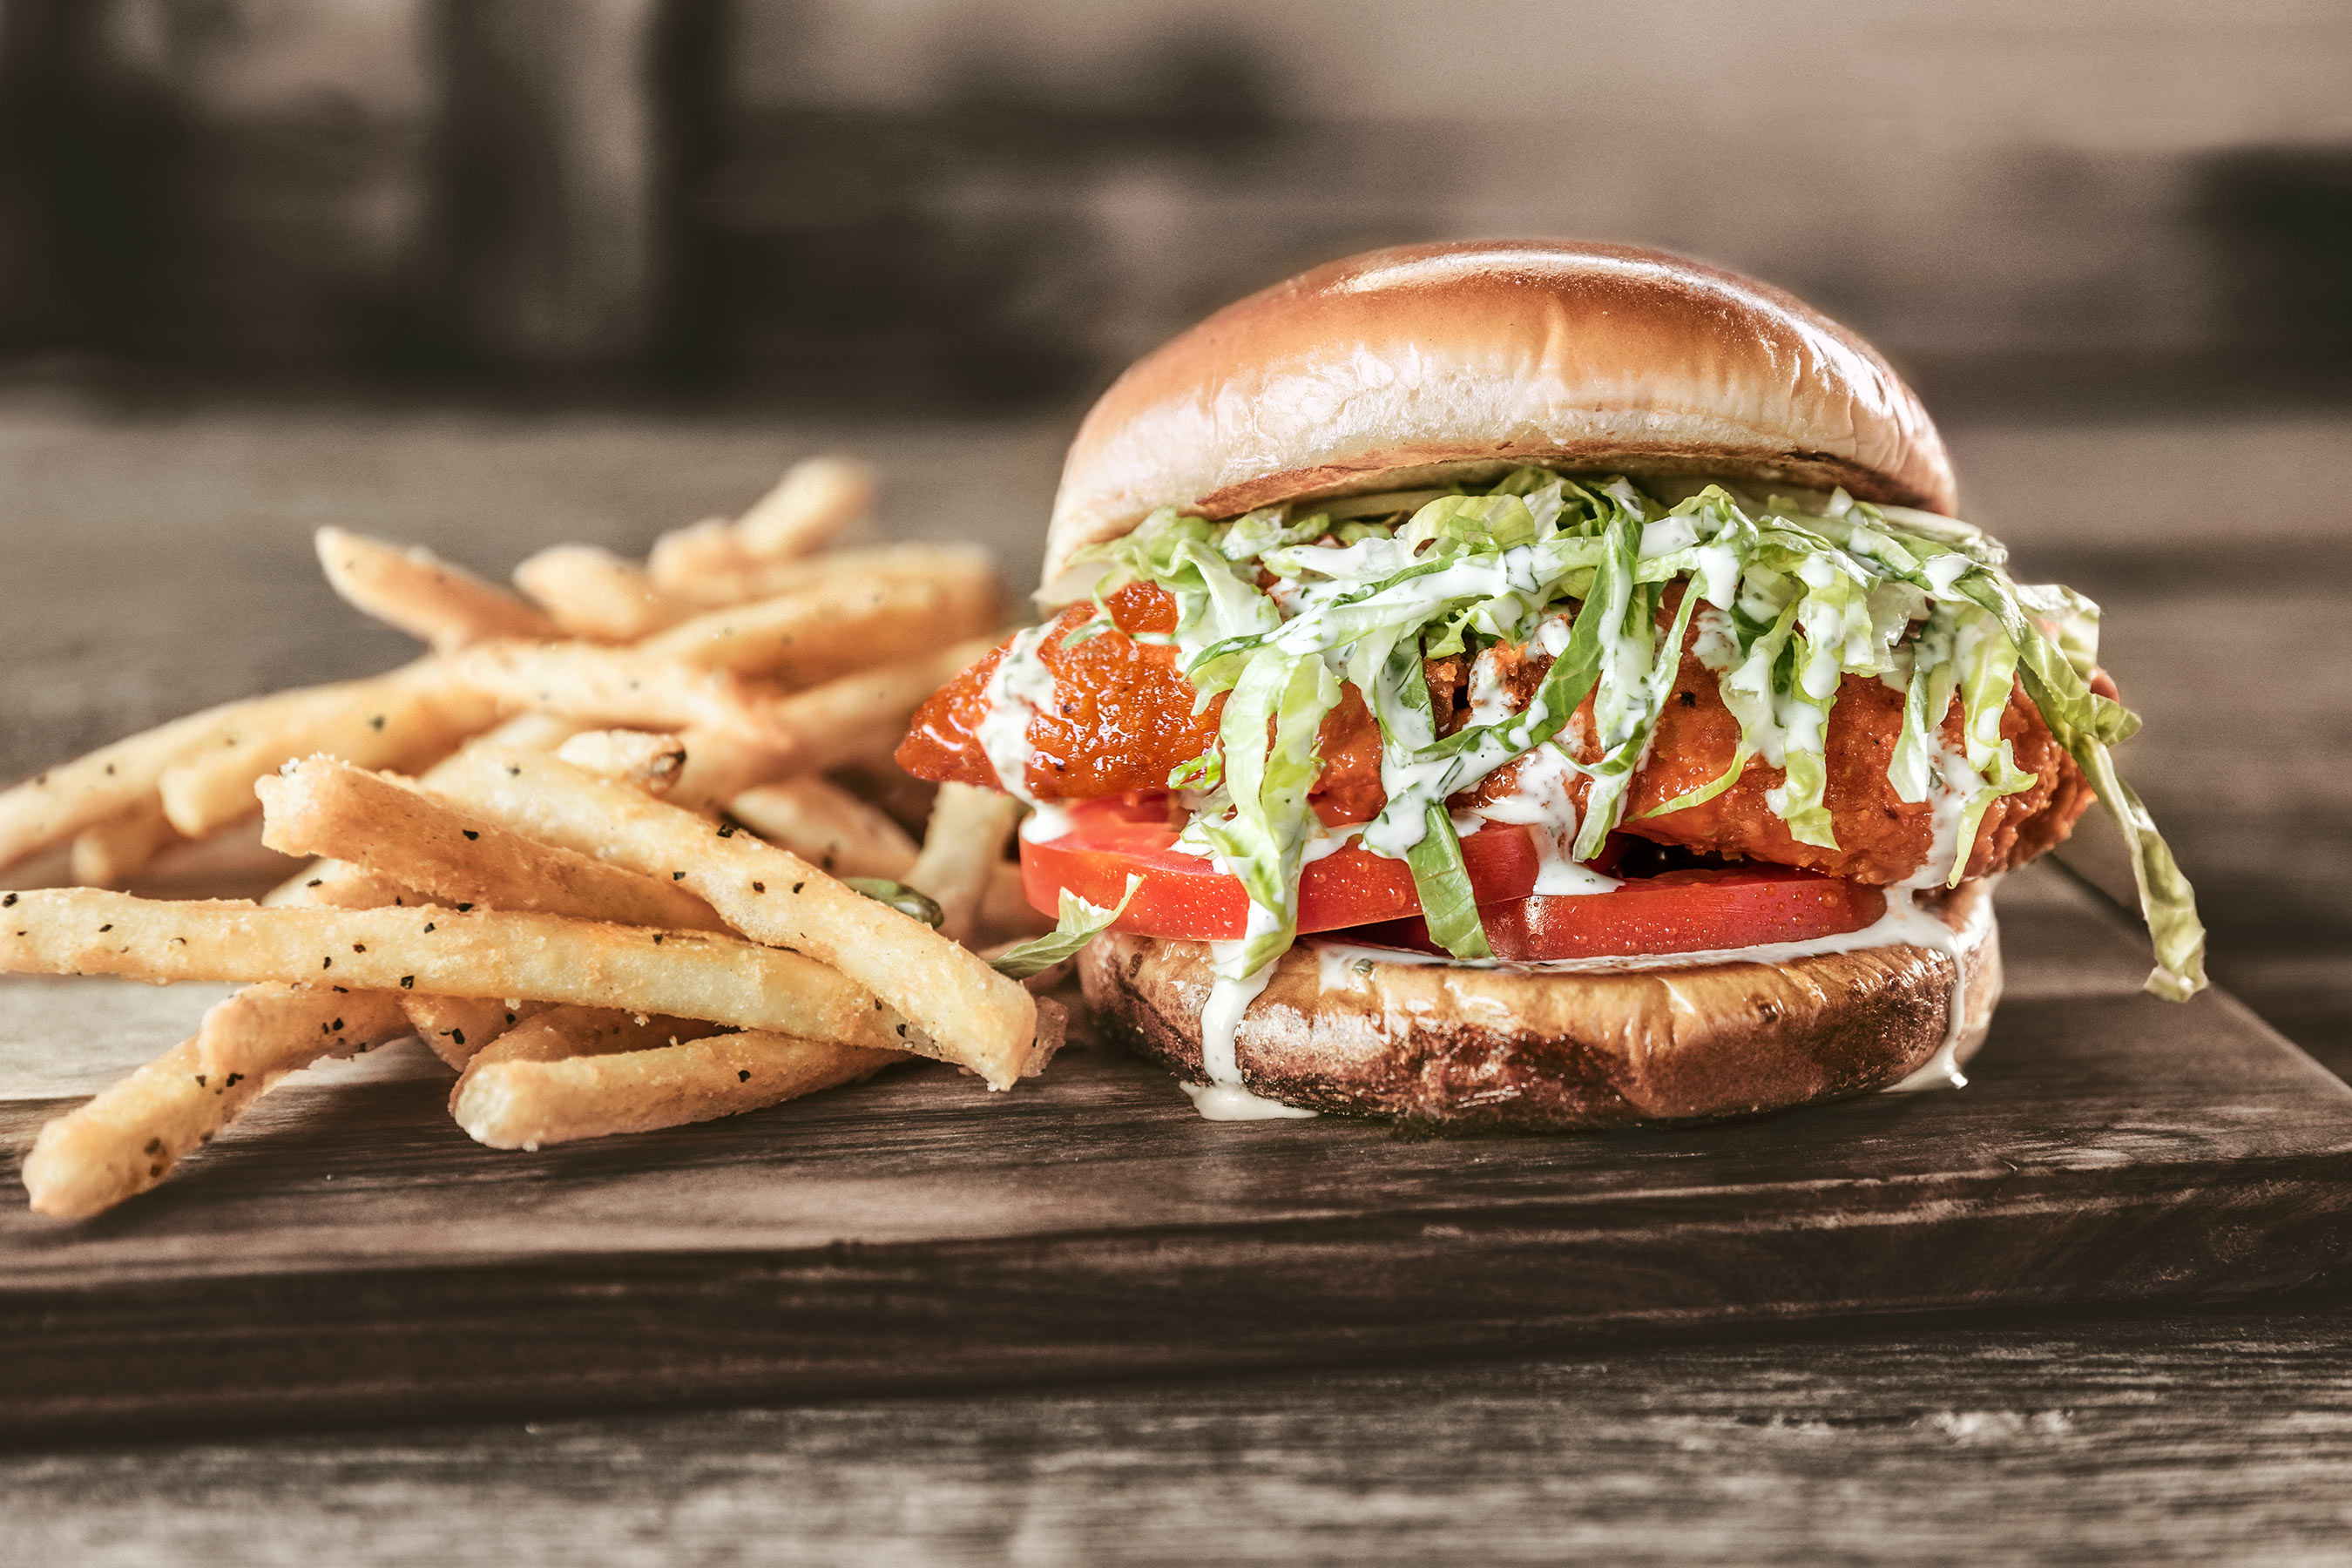 Spicy Buffalo Chicken Sandwich and Fries on rustic wood surface